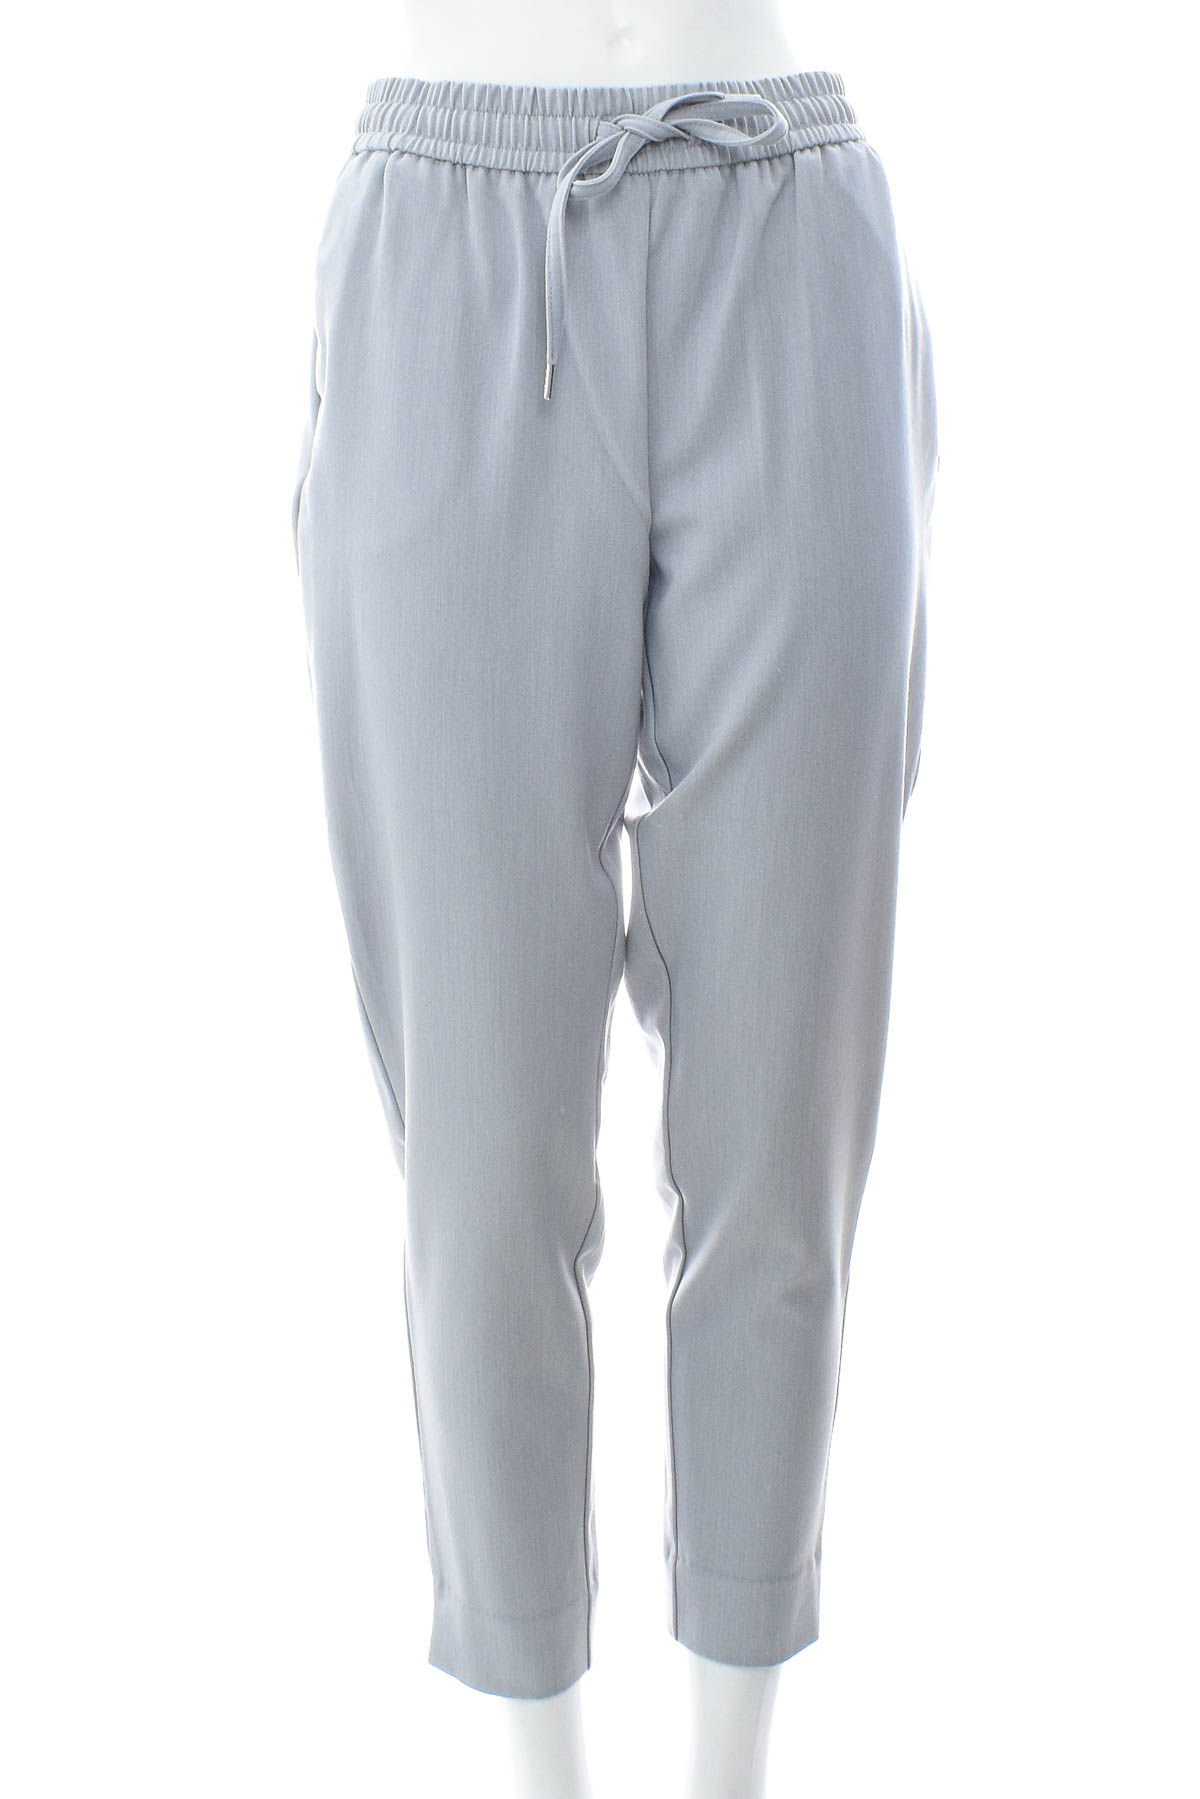 Women's trousers - RESERVED - 0